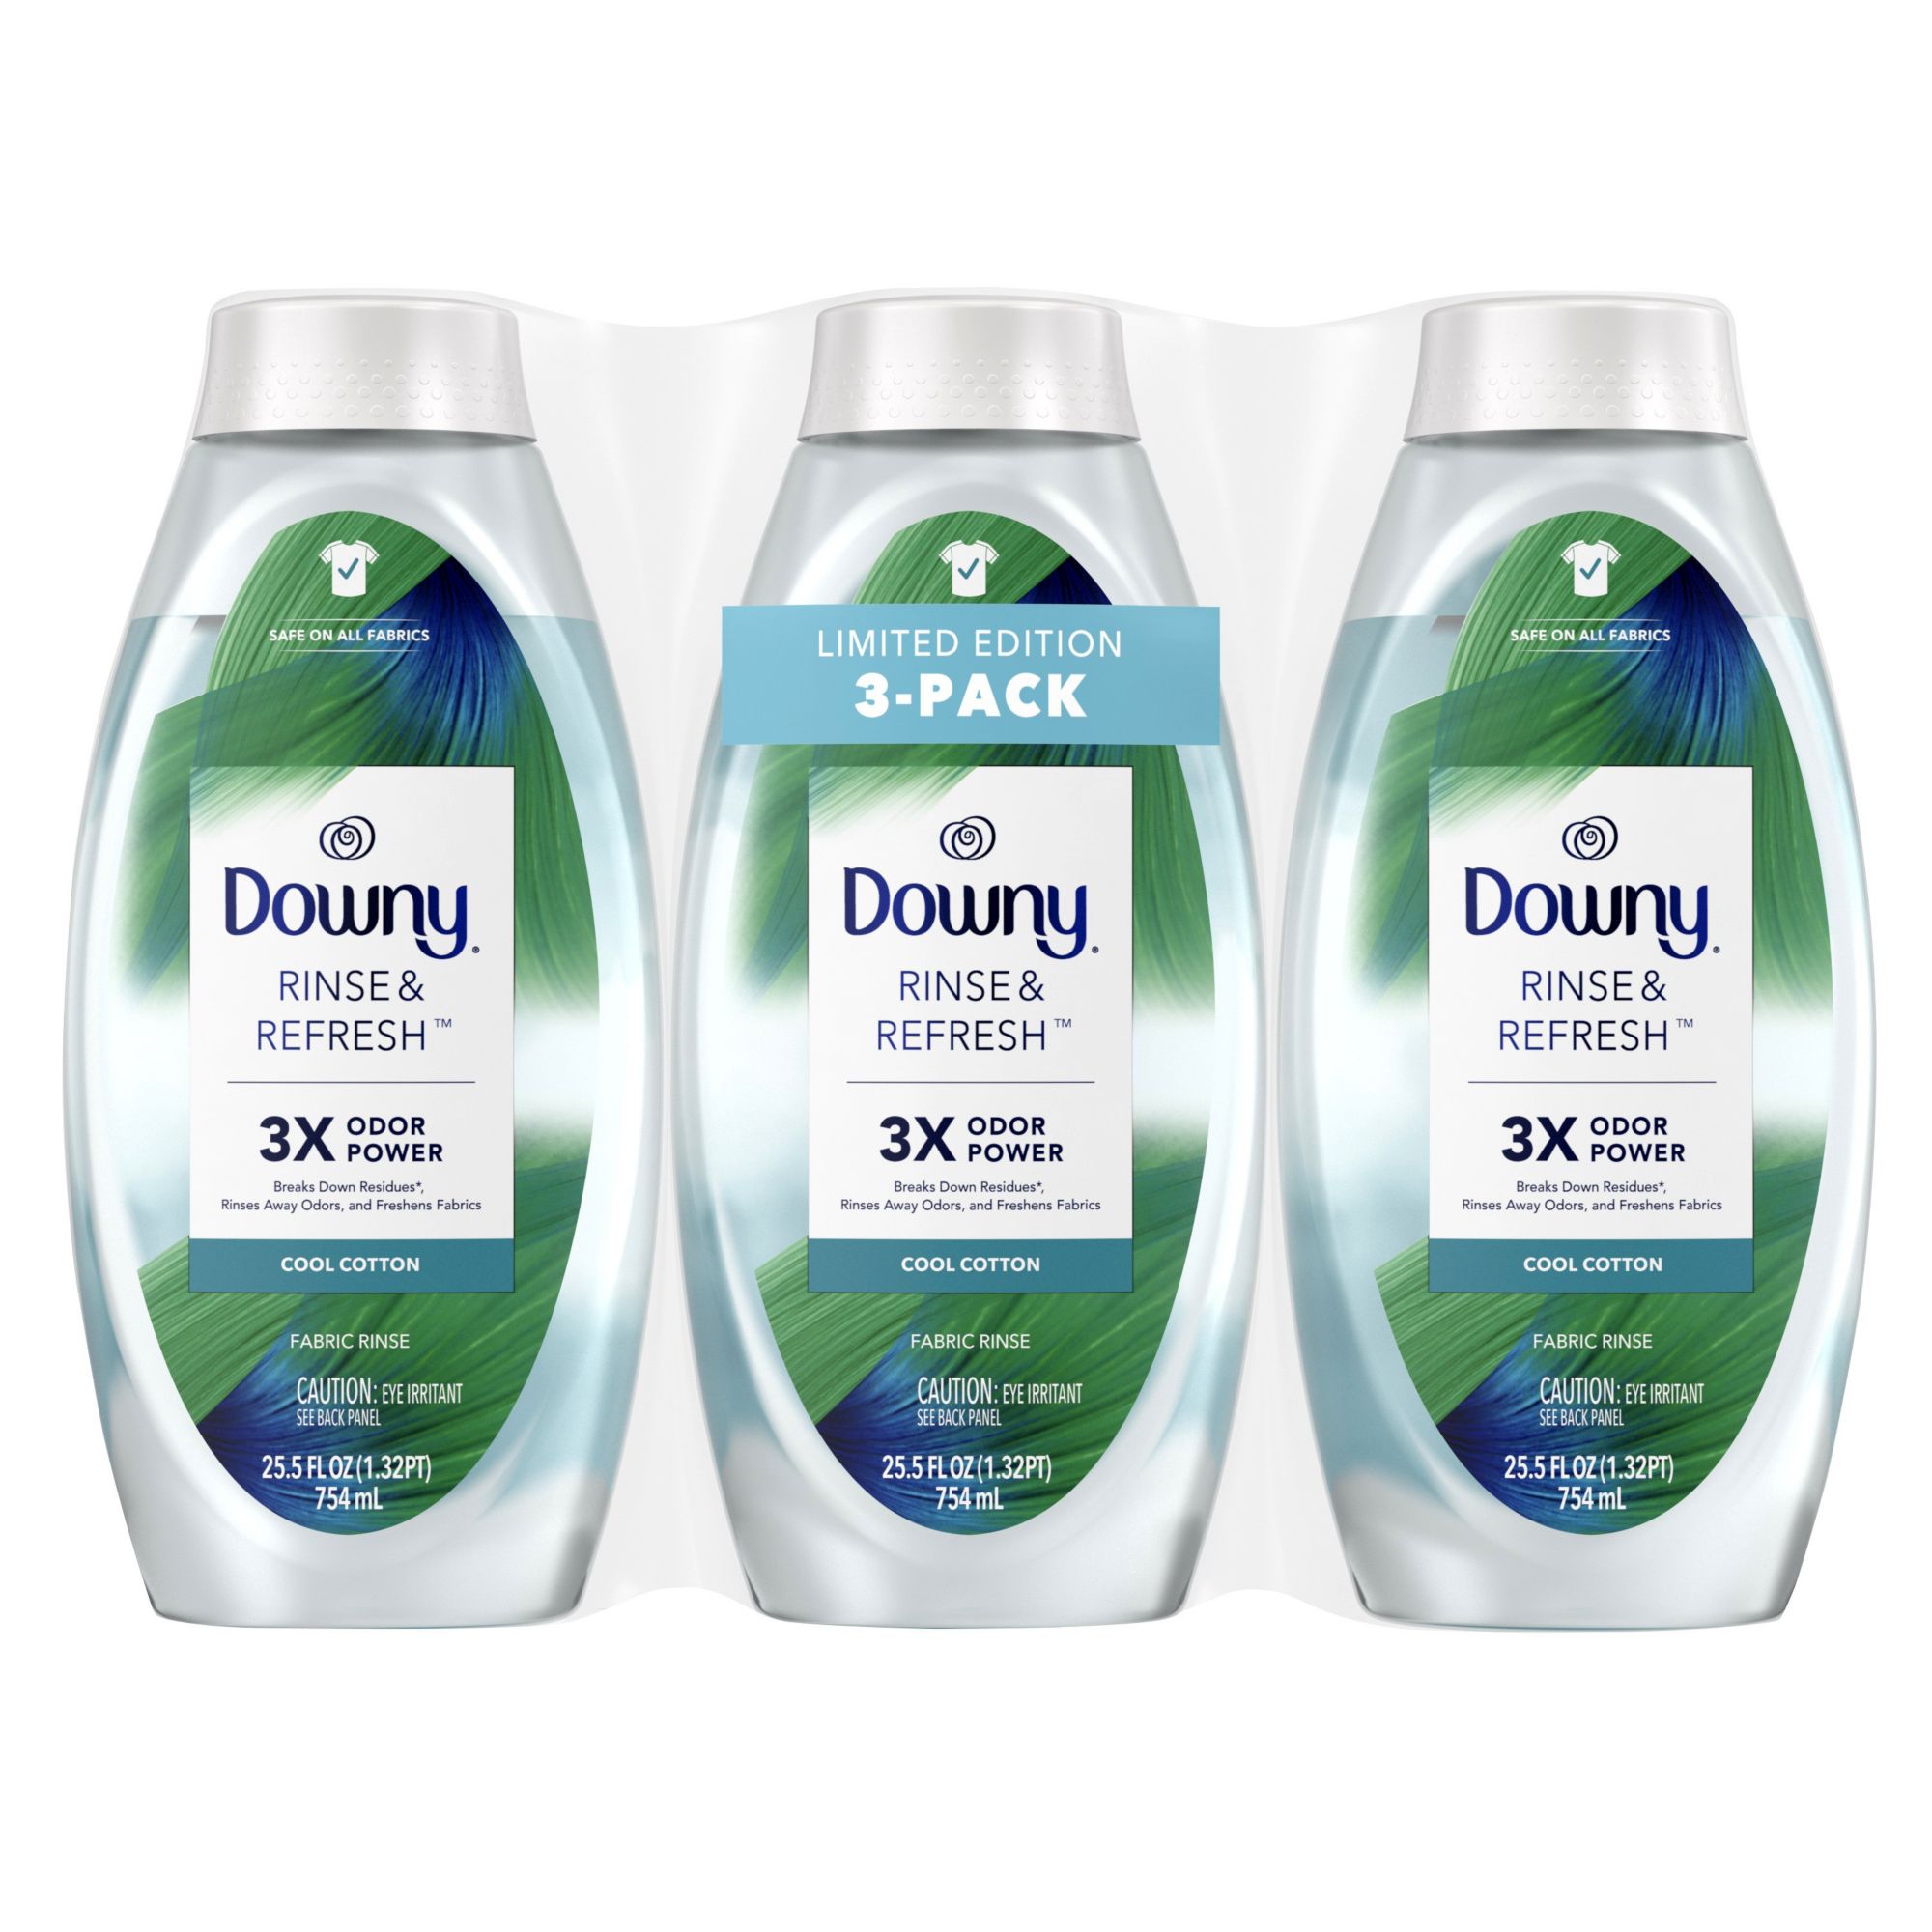 Downy beads scent, Beauty & Personal Care, Fragrance & Deodorants